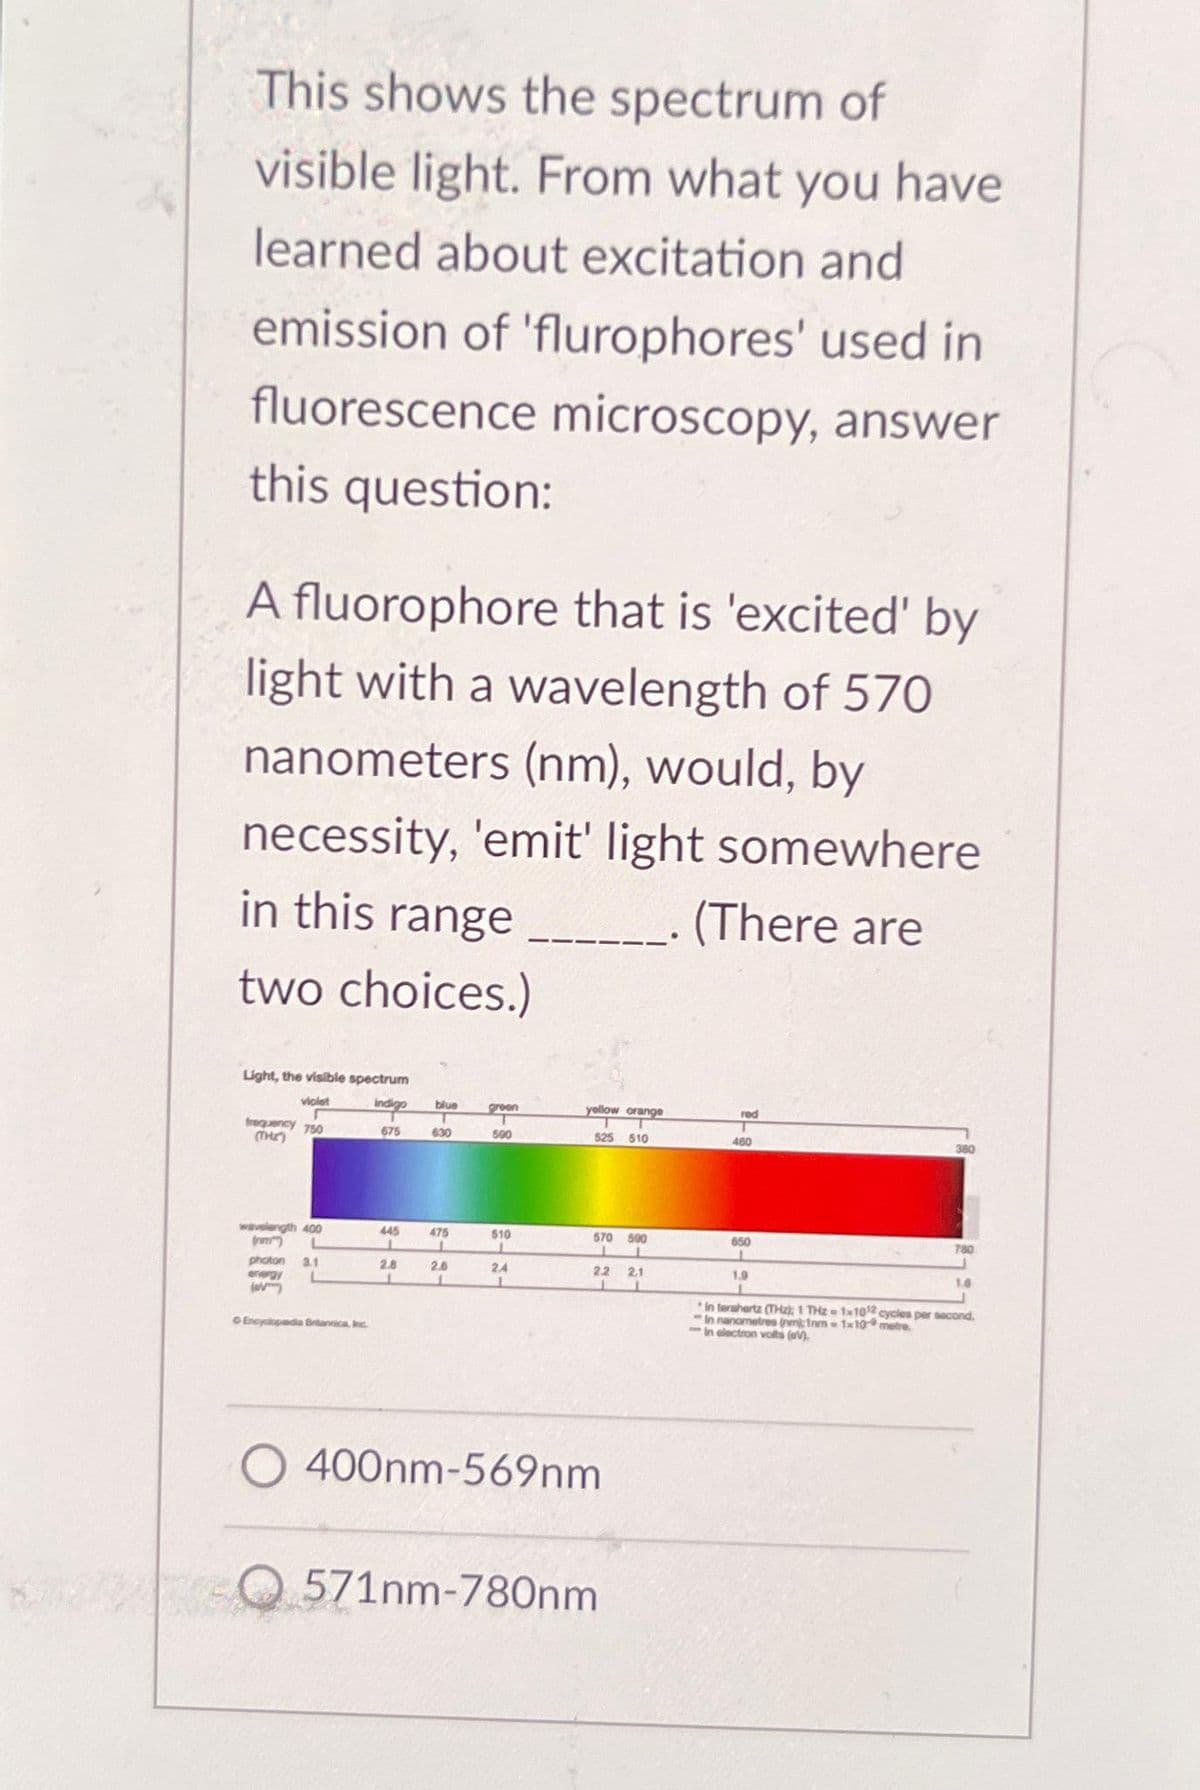 This shows the spectrum of
visible light. From what you have
learned about excitation and
emission of 'flurophores' used in
fluorescence microscopy, answer
this question:
A fluorophore that is 'excited' by
light with a wavelength of 570
nanometers (nm), would, by
necessity, 'emit' light somewhere
in this range ___. (There are
two choices.)
Light, the visible spectrum
violet
Indigo
675
r
frequency 750
(THE)
wavelength 400
photon 3.1
energy
(1)
Encyclopedia Britannica, Inc.
445
2.8
1
blue
T
630
475
1
2.6
1
groen
500
510
24
1
yellow orange
525 510
570 590
1
2.2 21
400nm-569nm
Q571nm-780nm
red
460
650
1.9
380
780
1.6
in terahertz (THz: 1 THz - 1x102 cycles per second.
in nanometres (nm); 1nm 1x10 metre.
in electron volts (V)